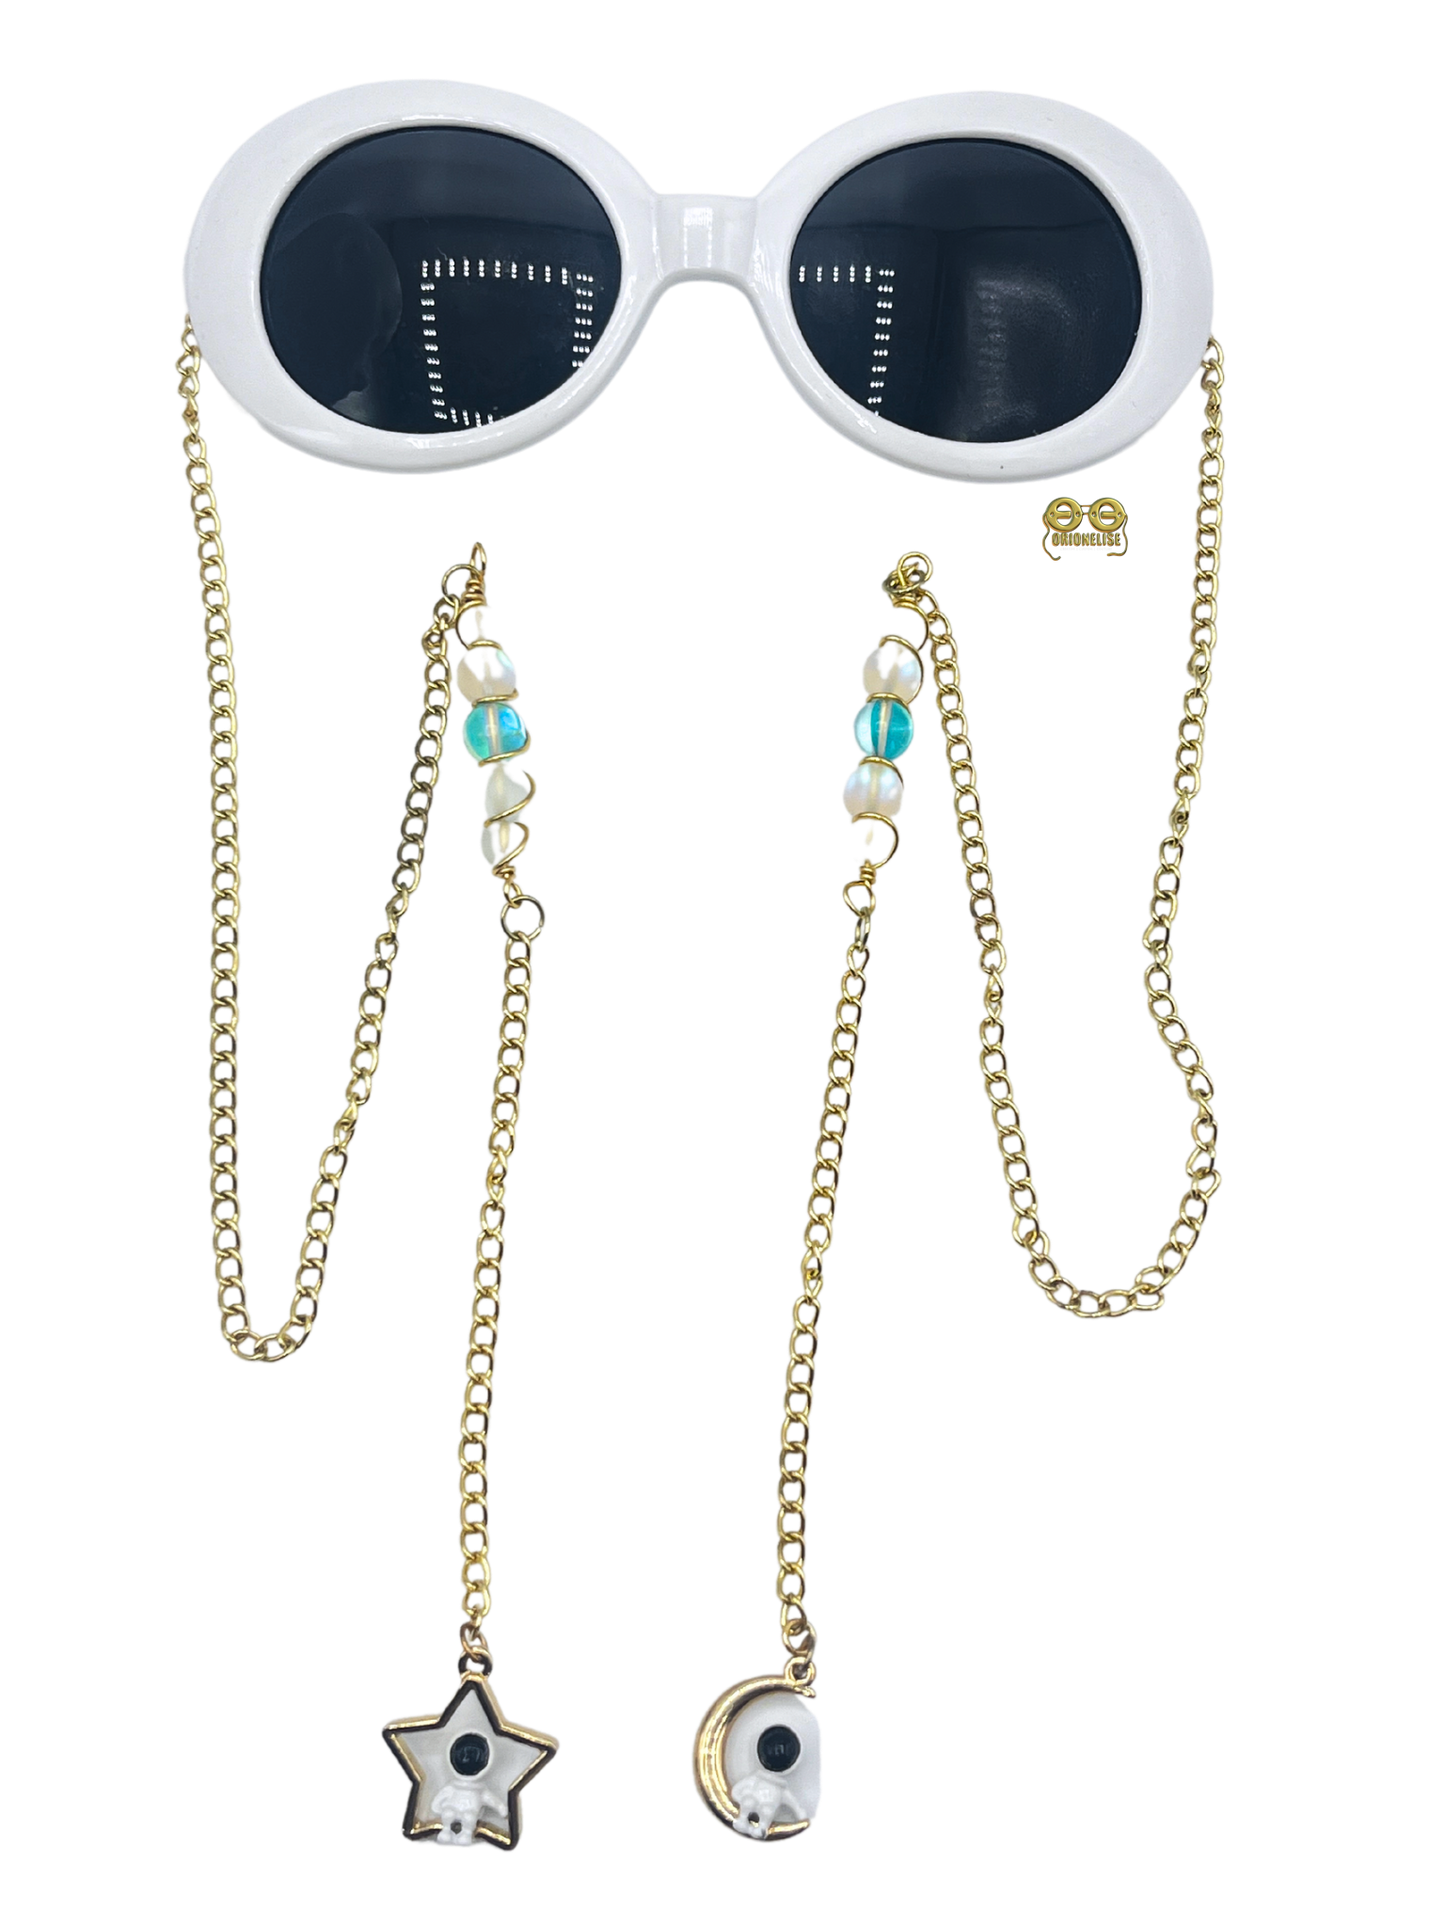 "Spaced Out" fashion eyewear by Orion Elise. Gold chain arms with glass bead and wire entanglement. Metal moon and star charms with astronauts, evoking a cosmic journey. Embrace your inner astronaut and reach for the stars with "Spaced Out." 